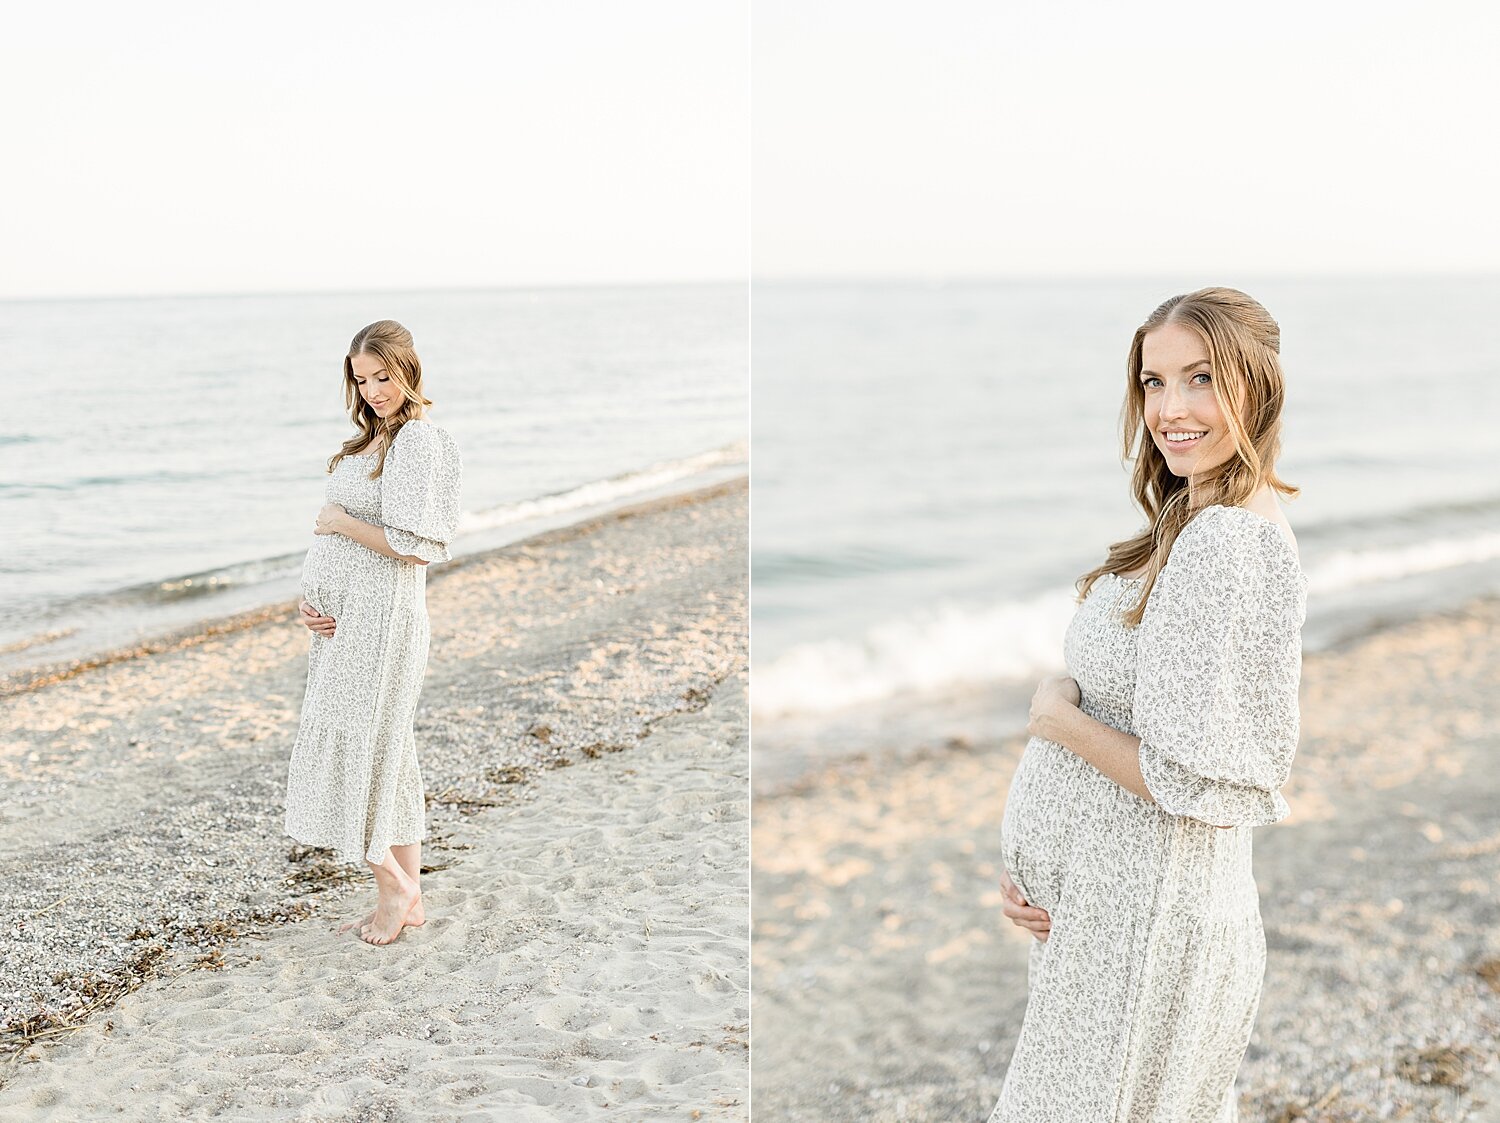 Sunset beach maternity session at Sherwood Island in Westport, CT with Kristin Wood Photography.